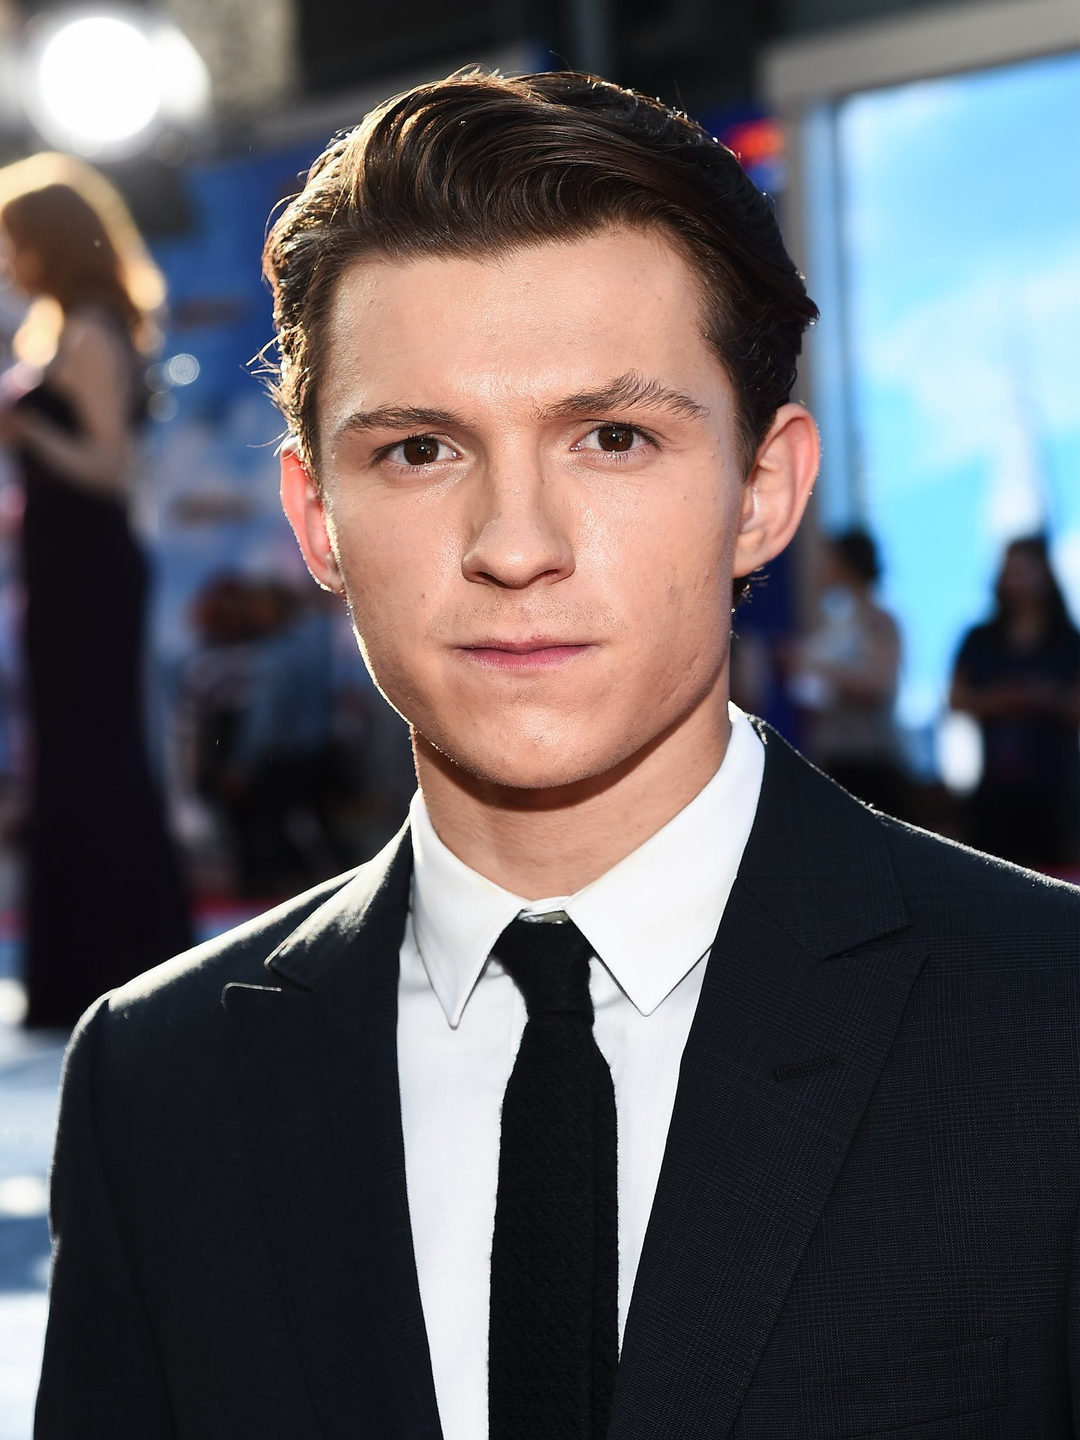 Tom Holland early life